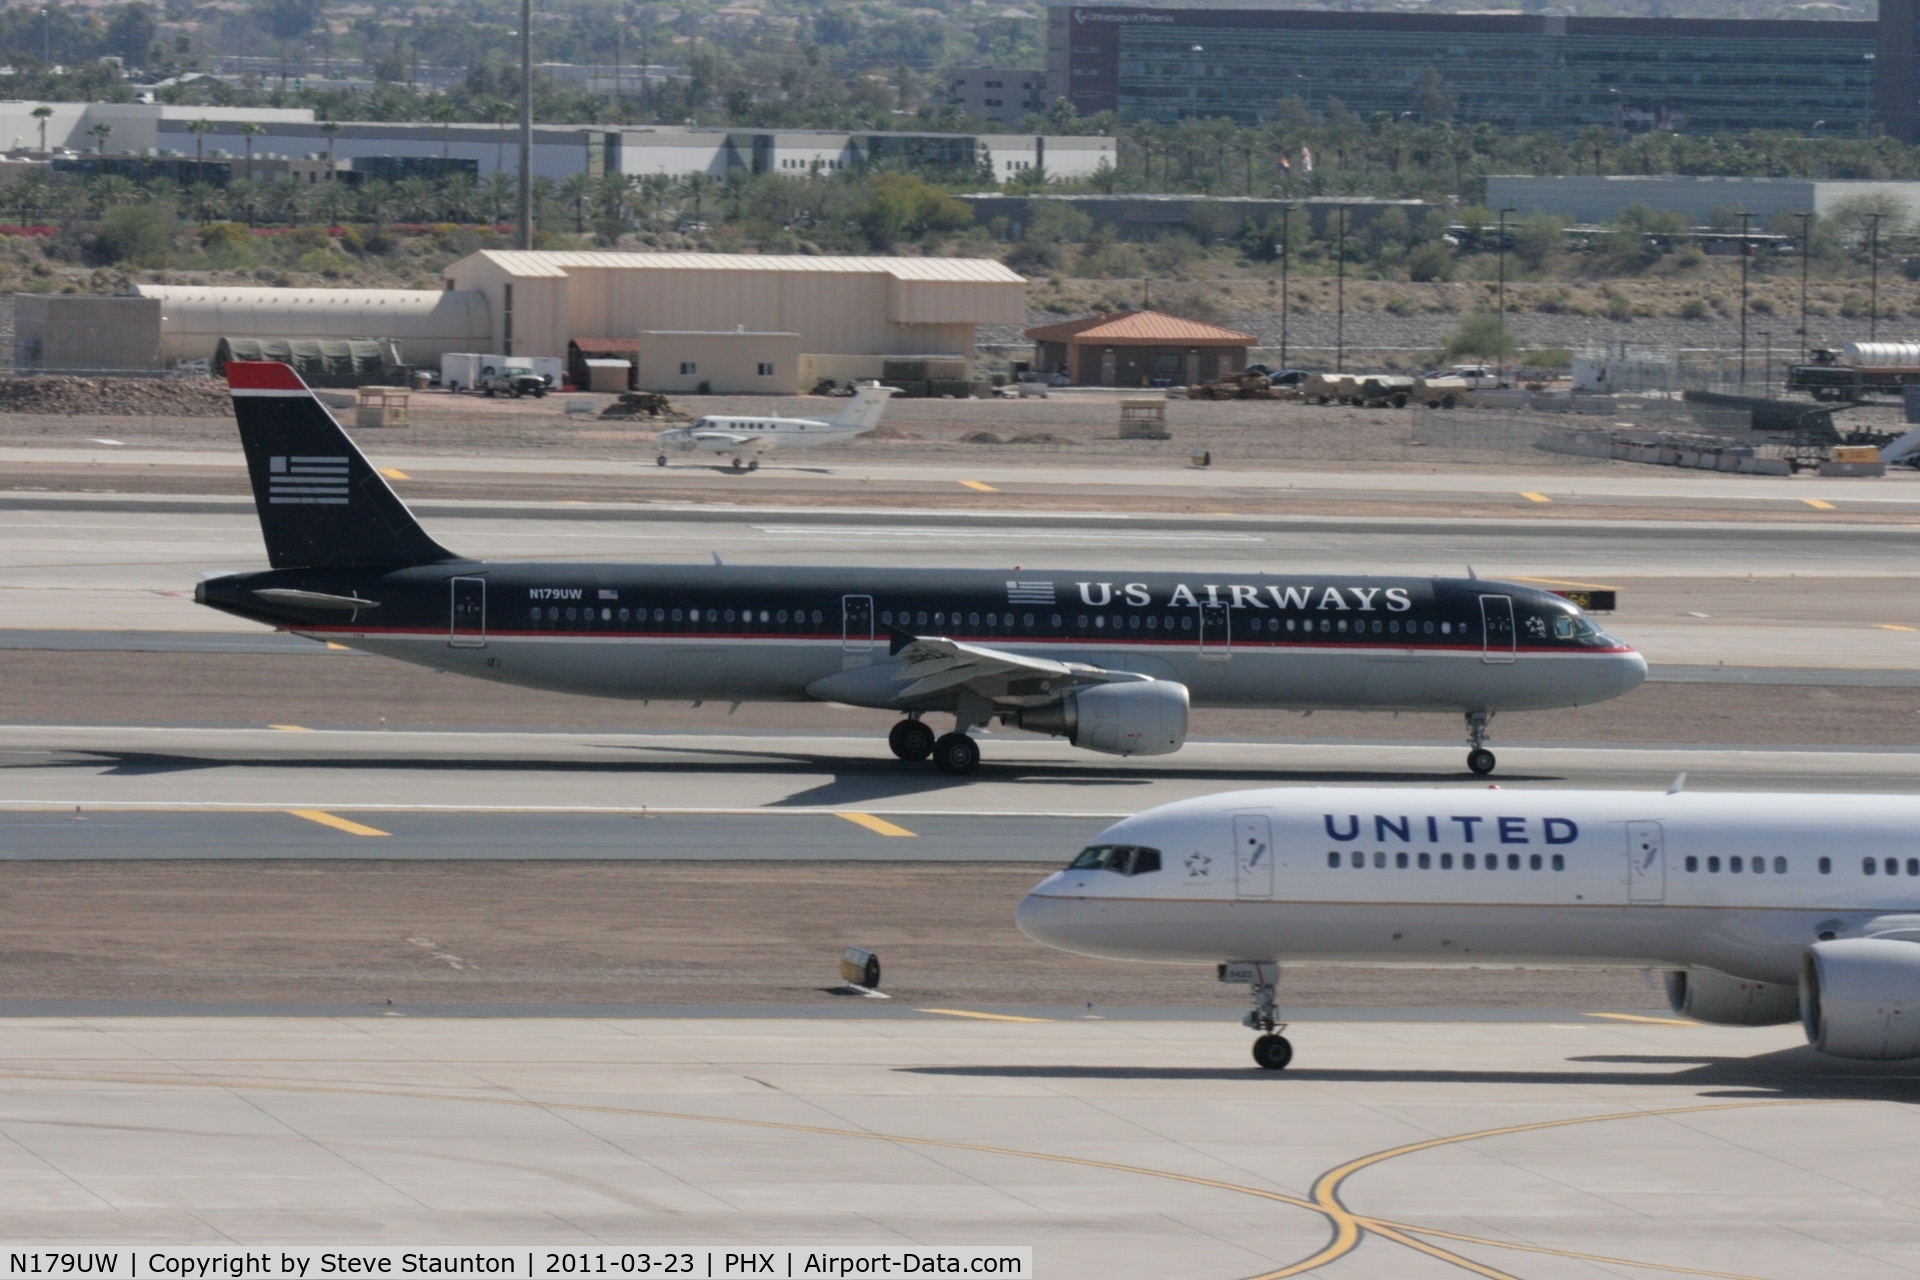 N179UW, 2001 Airbus A321-211 C/N 1521, Taken at Phoenix Sky Harbor Airport, in March 2011 whilst on an Aeroprint Aviation tour